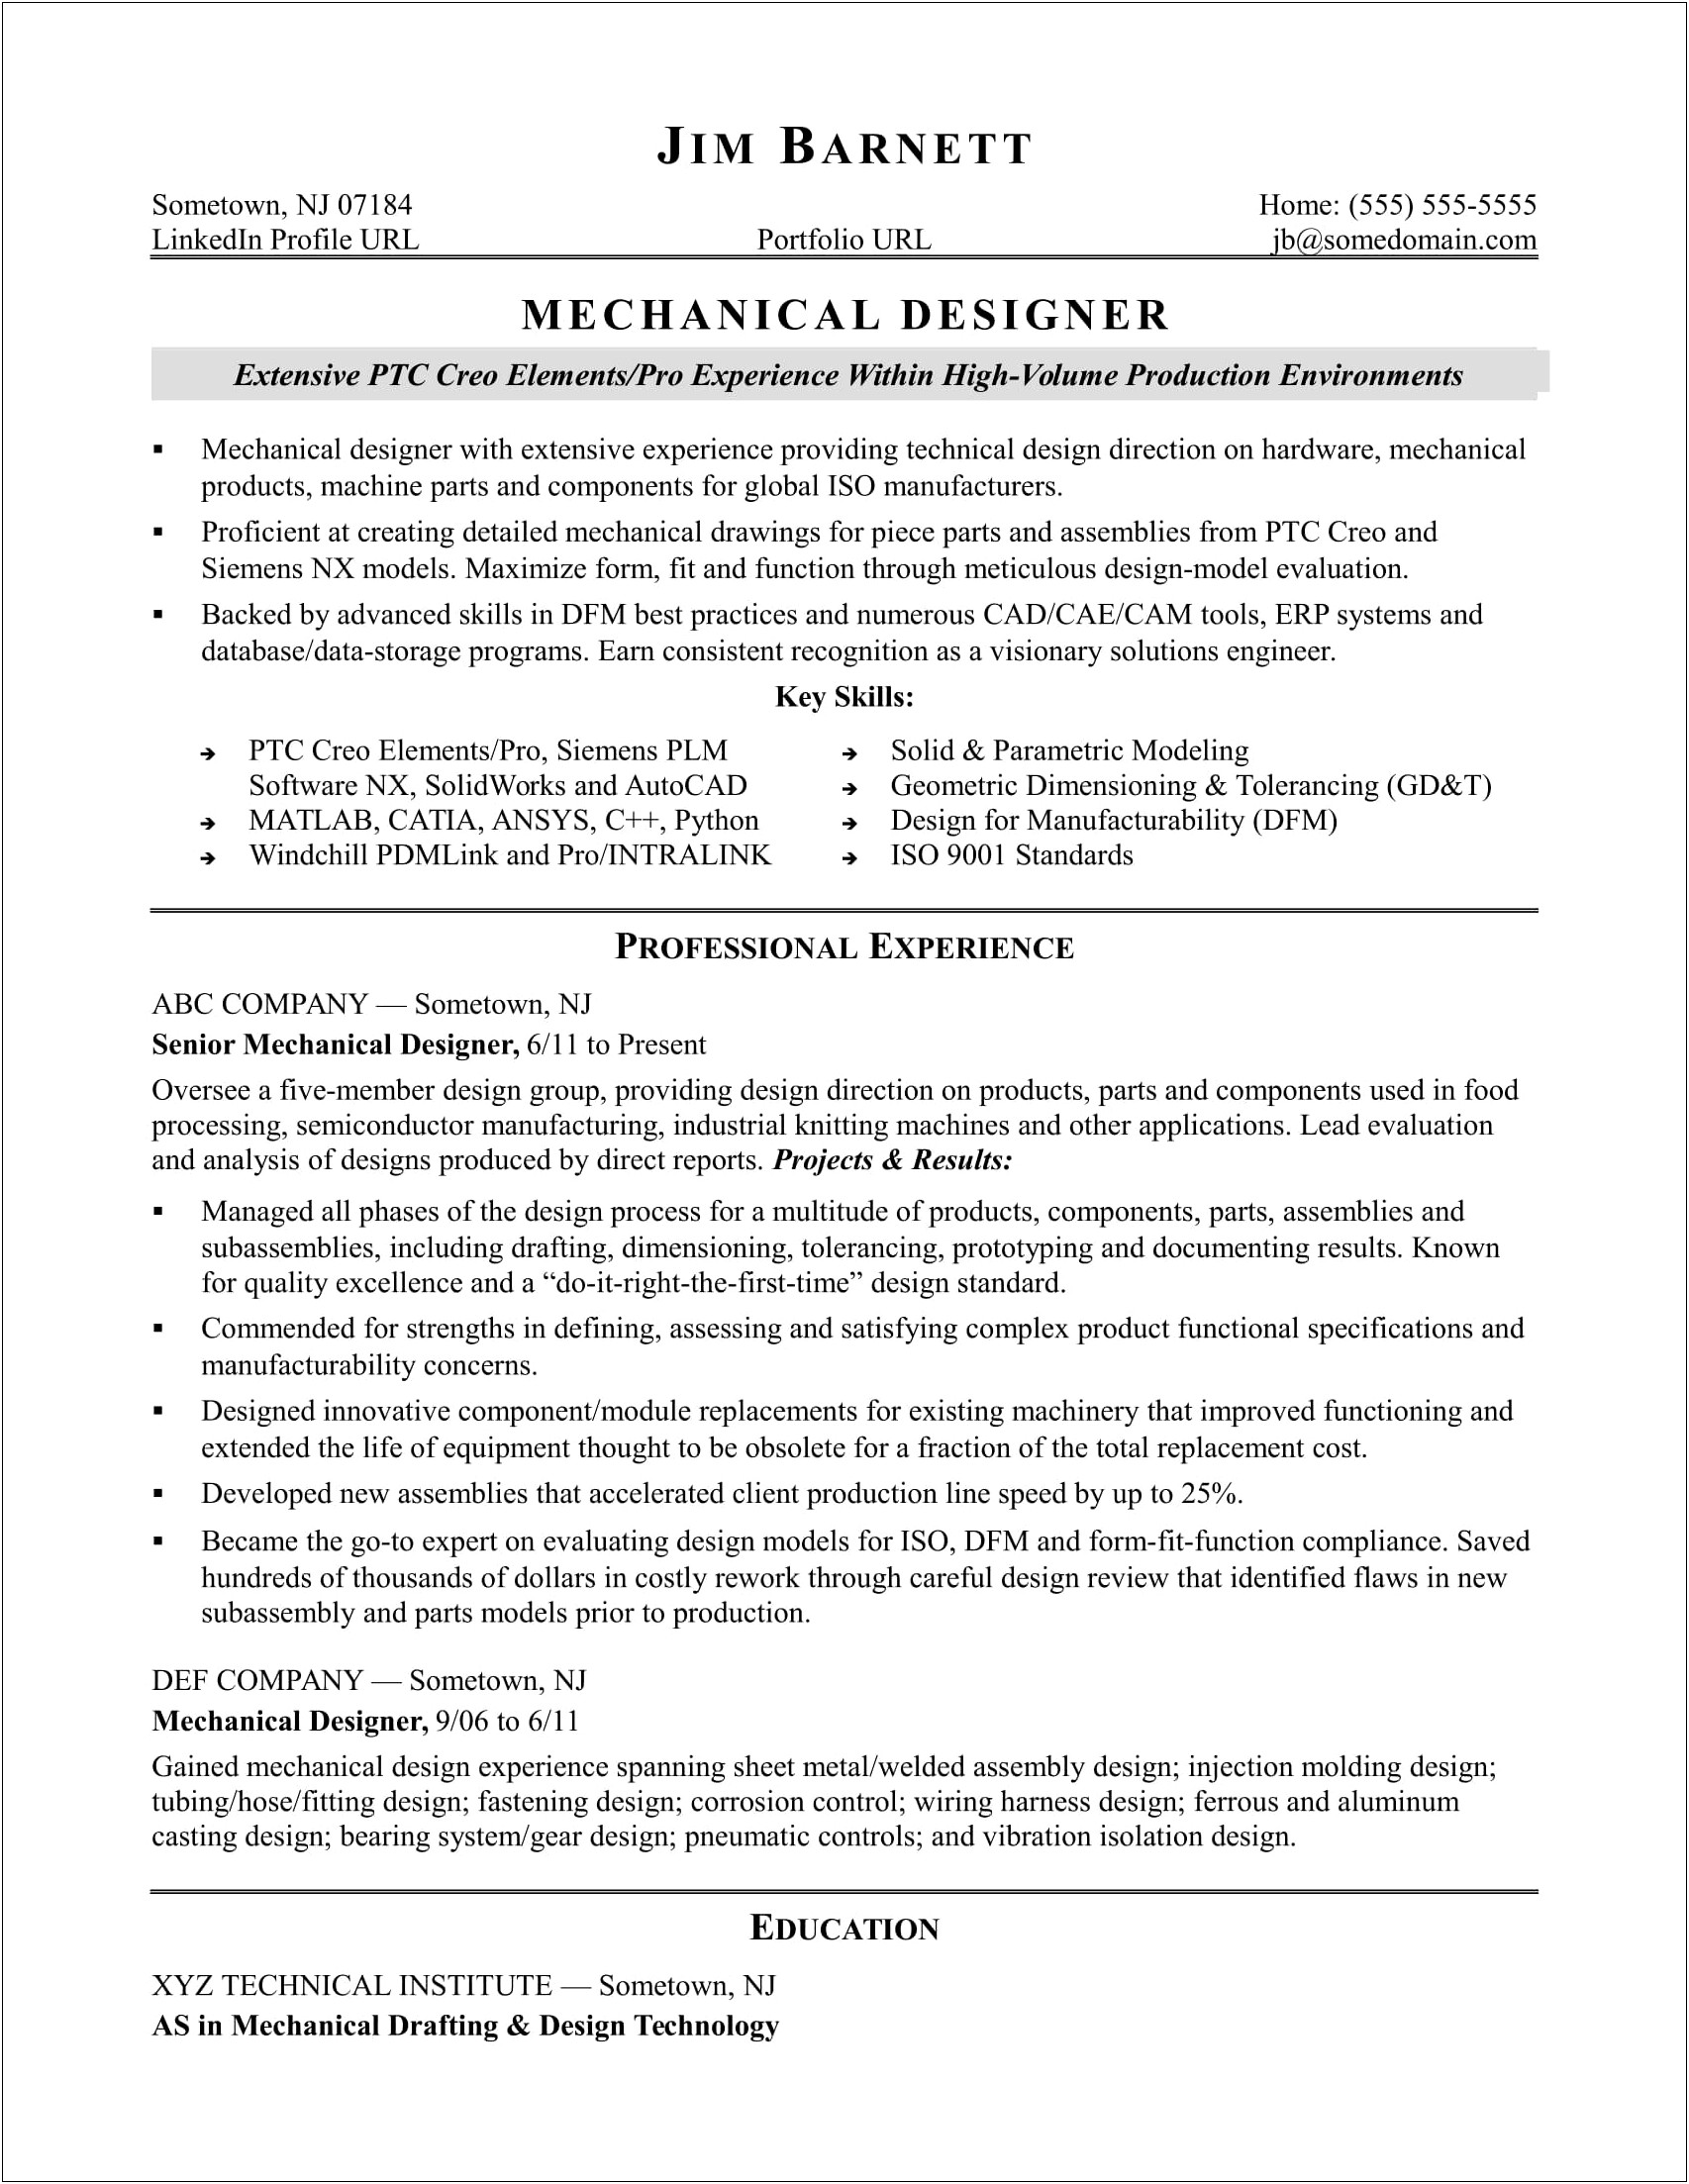 Summury Of Mech Engg For Resume Example